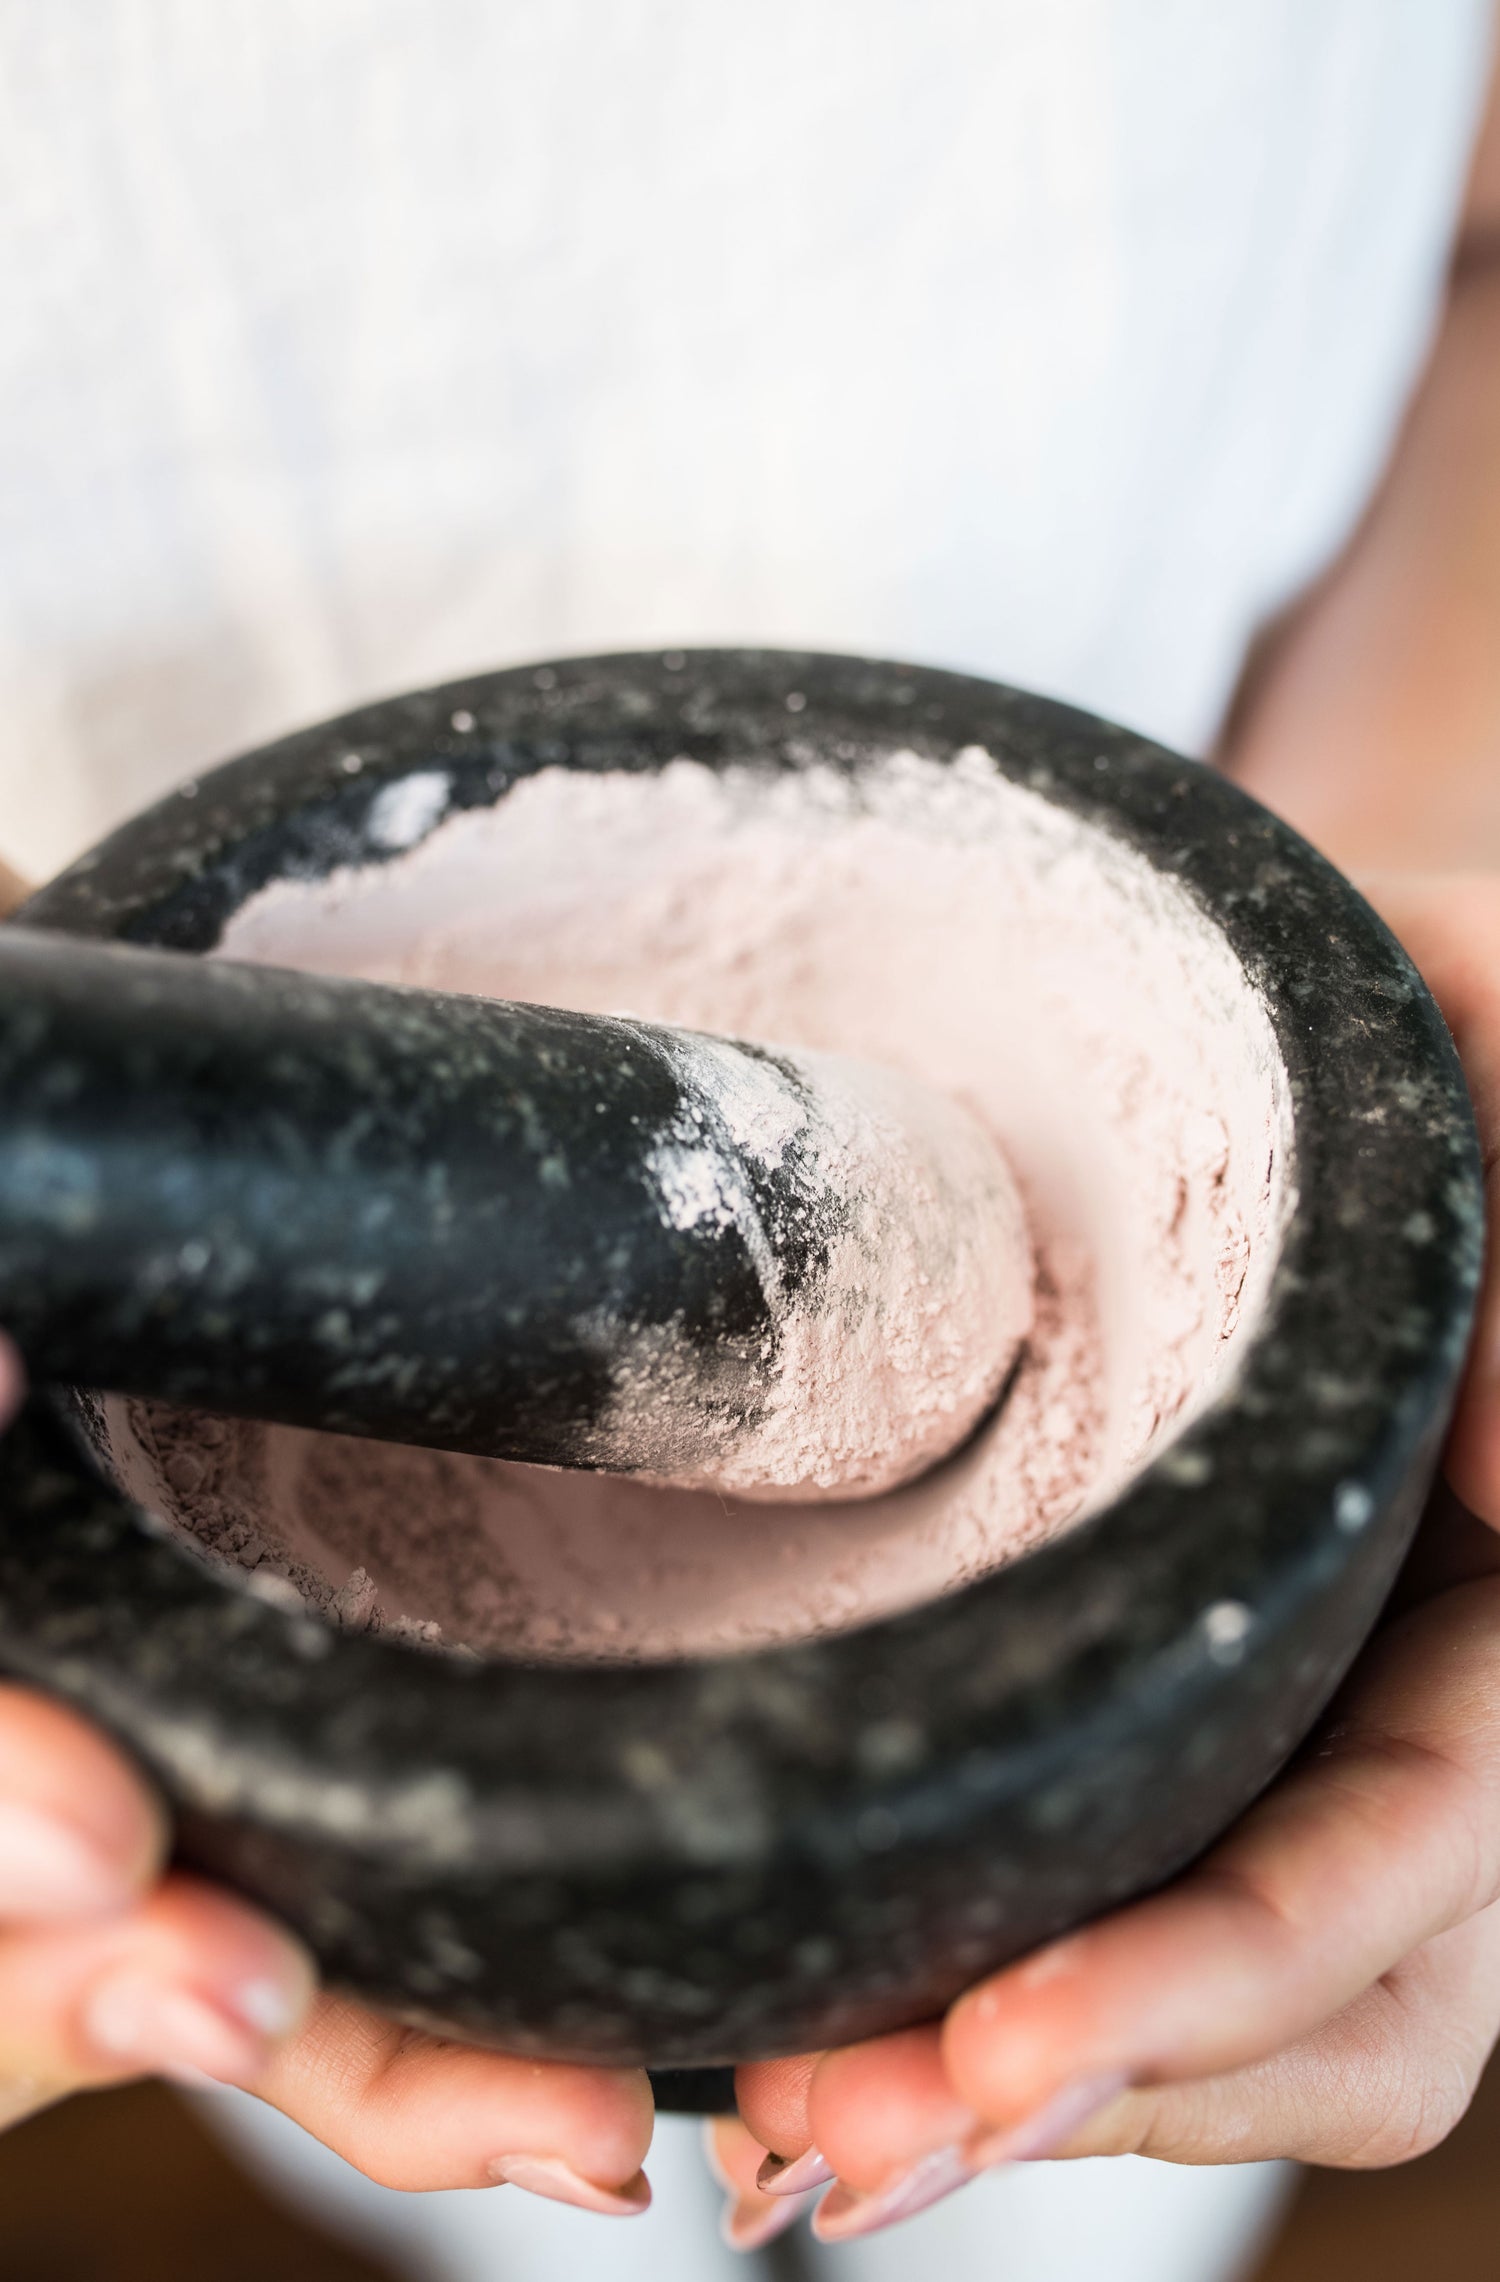 Skin care ingredients being ground in a pestle mortar